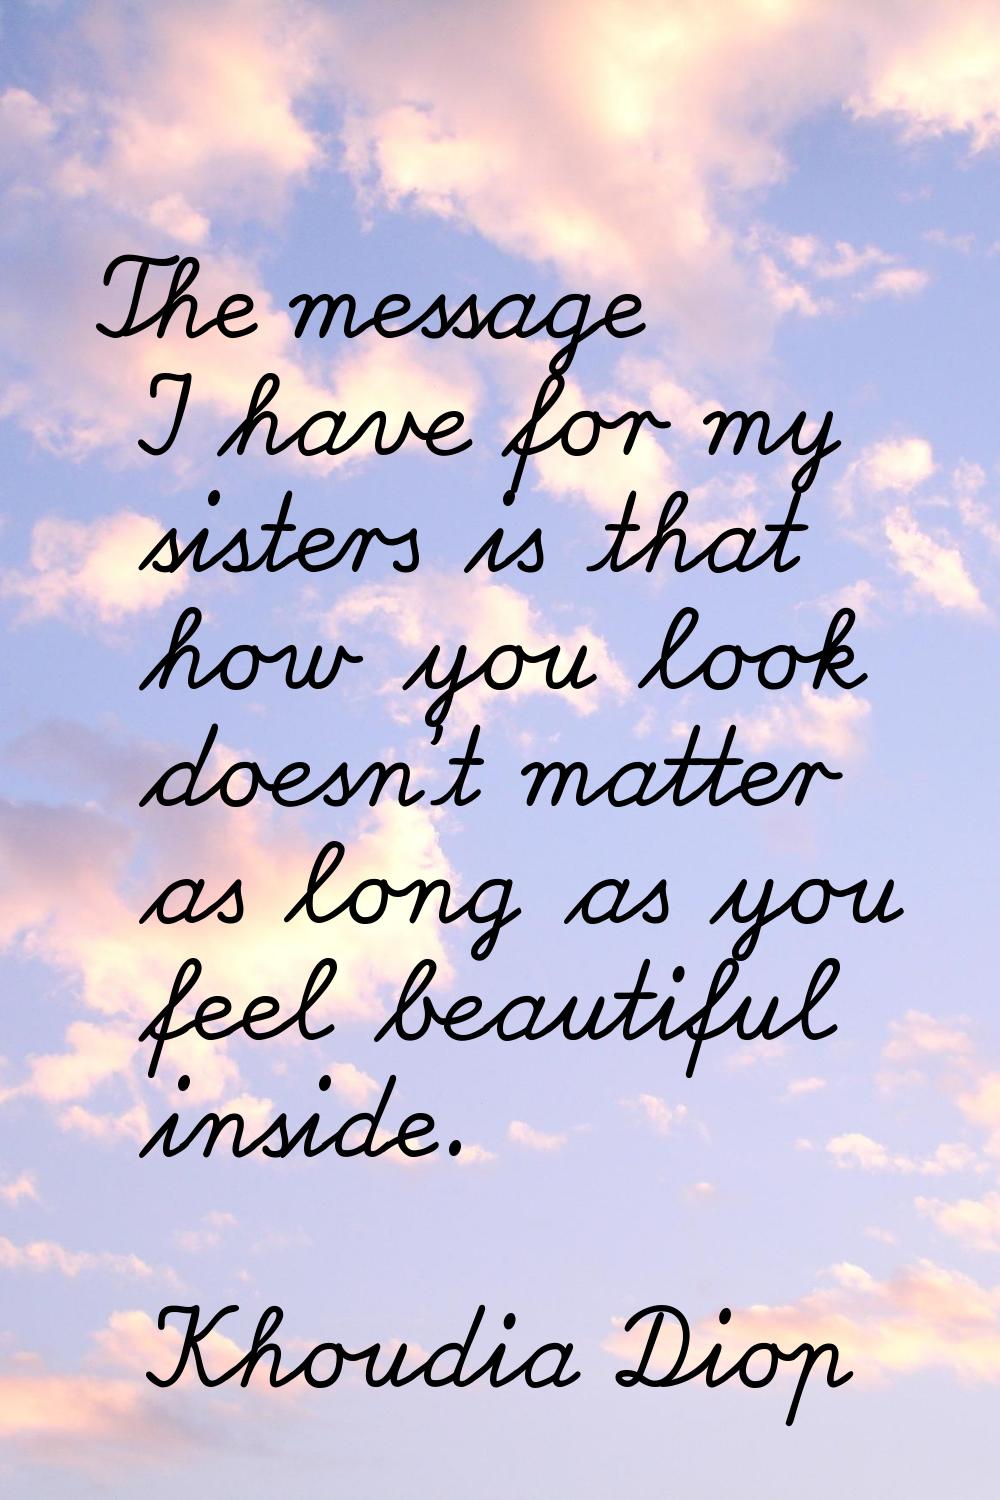 The message I have for my sisters is that how you look doesn't matter as long as you feel beautiful